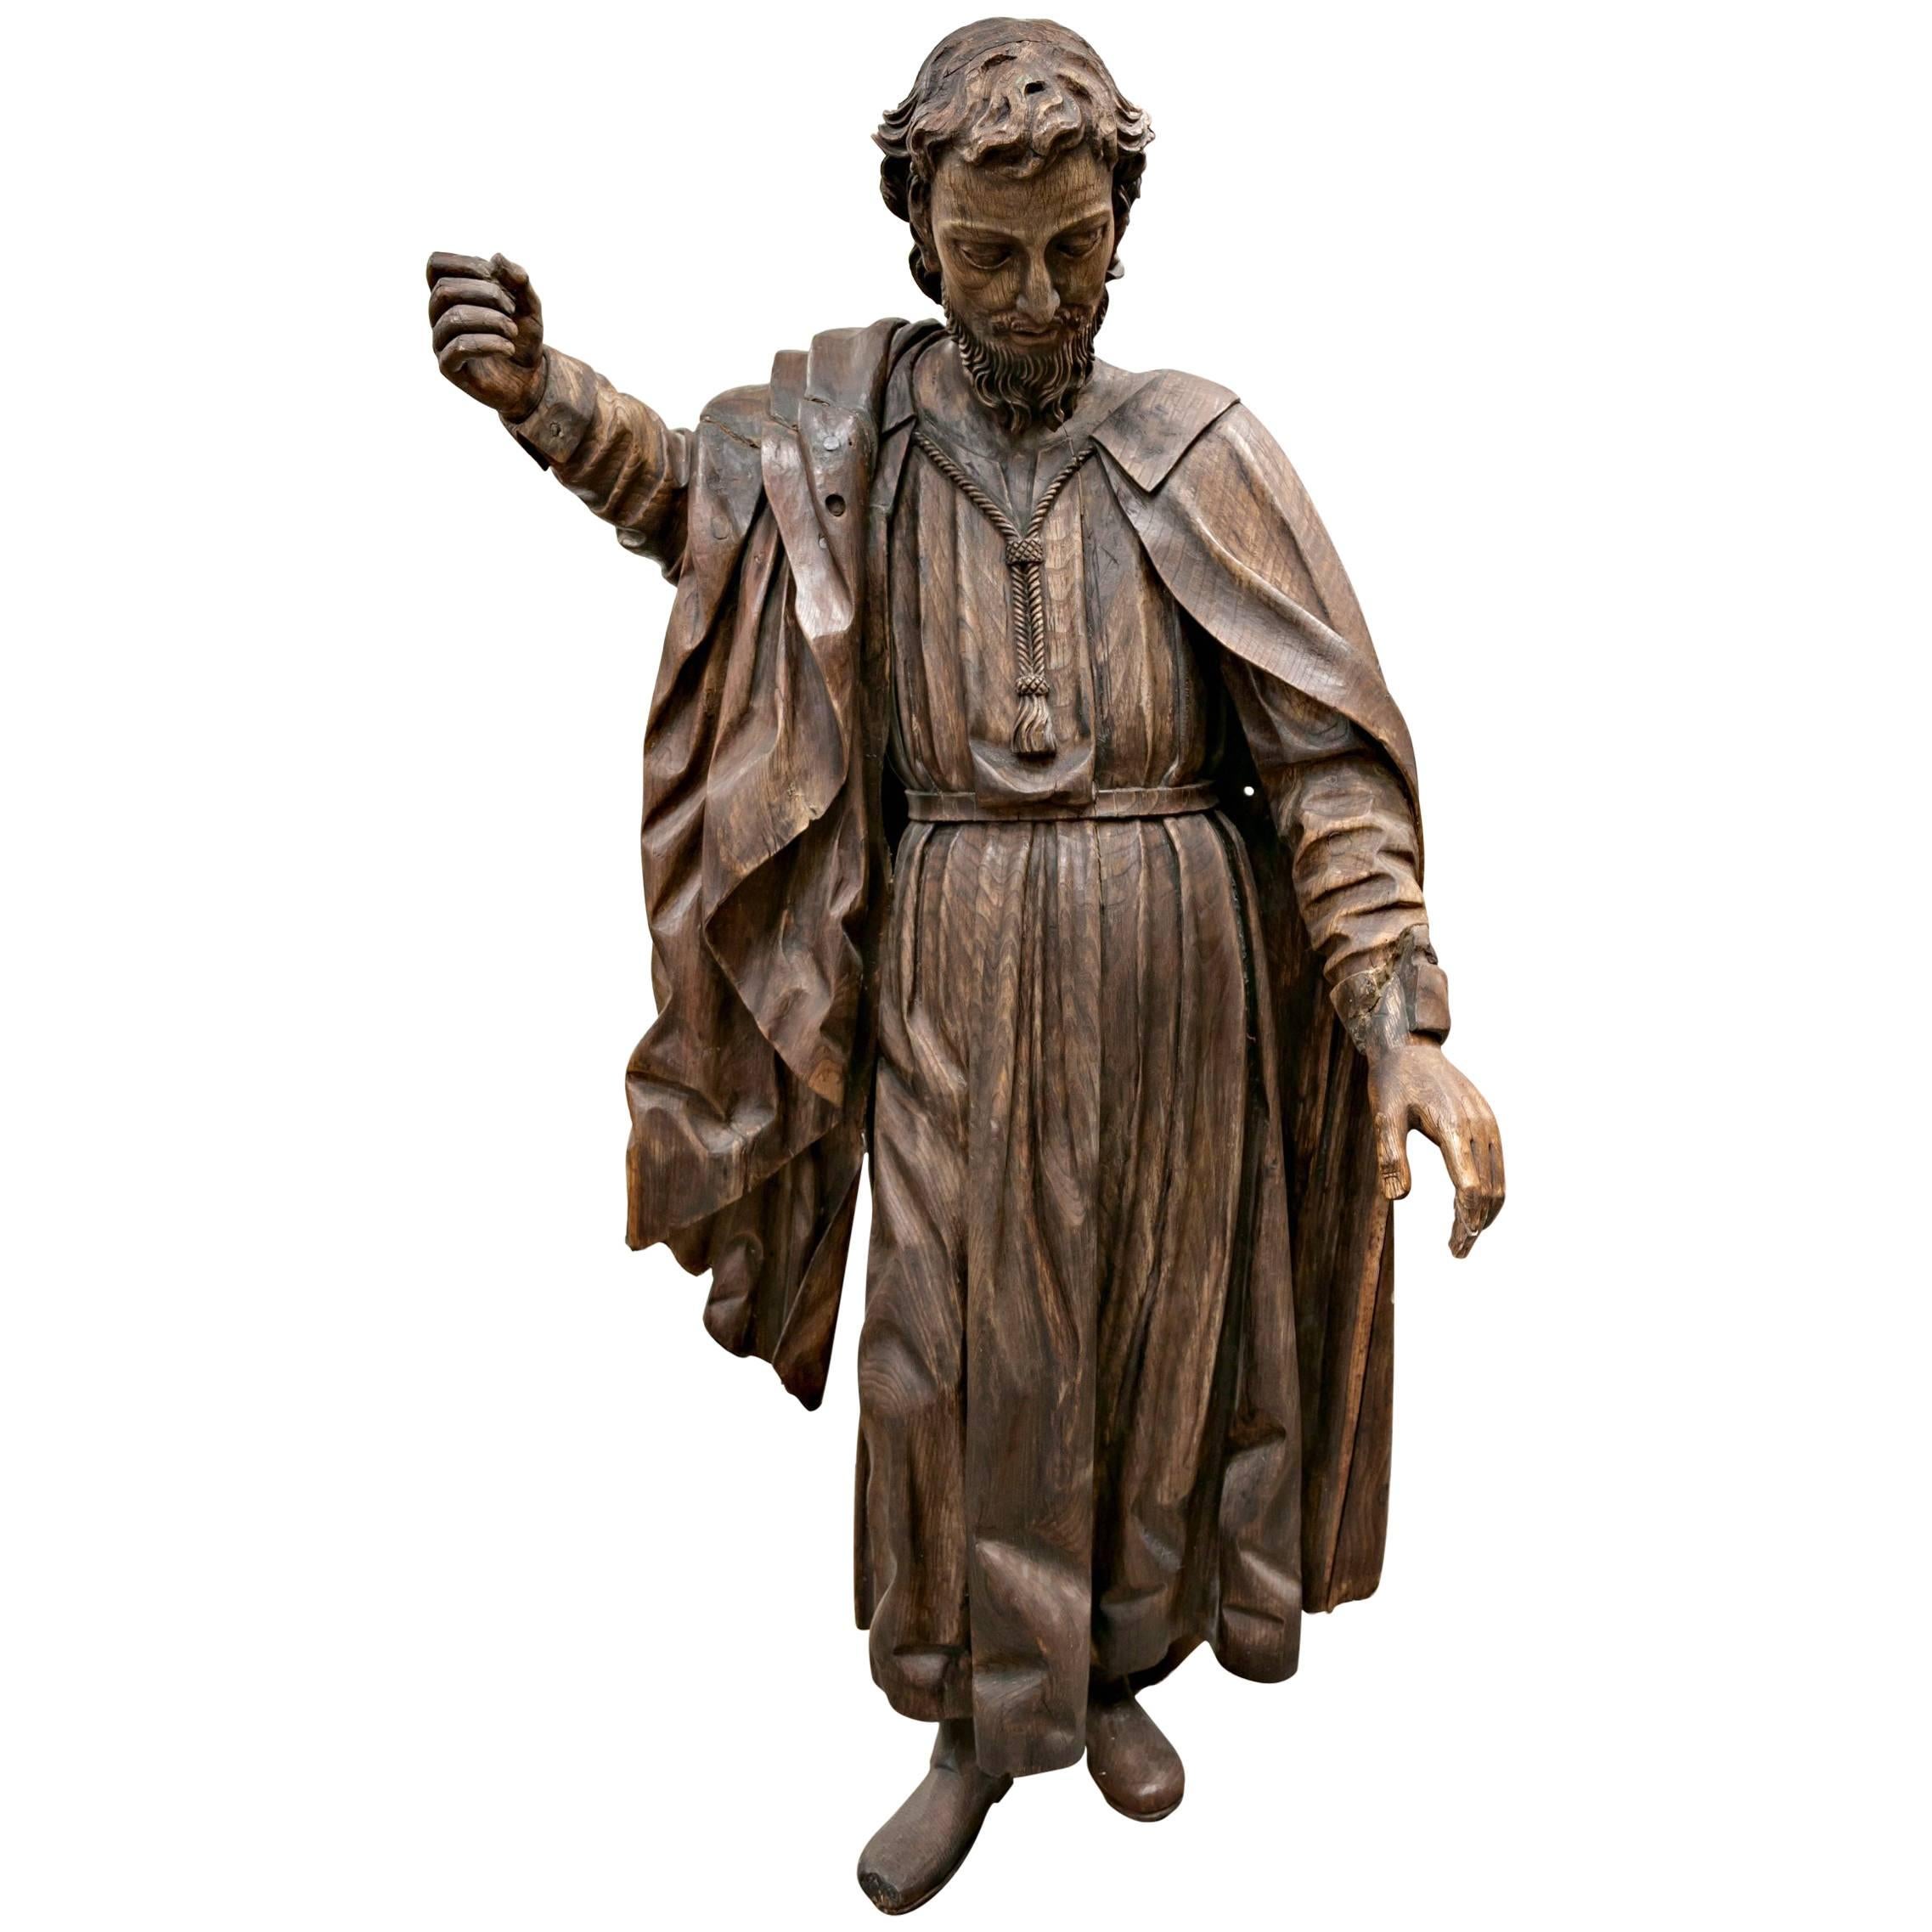 Rare 18th Century Life Size Carved Wood Statue of St. Joseph